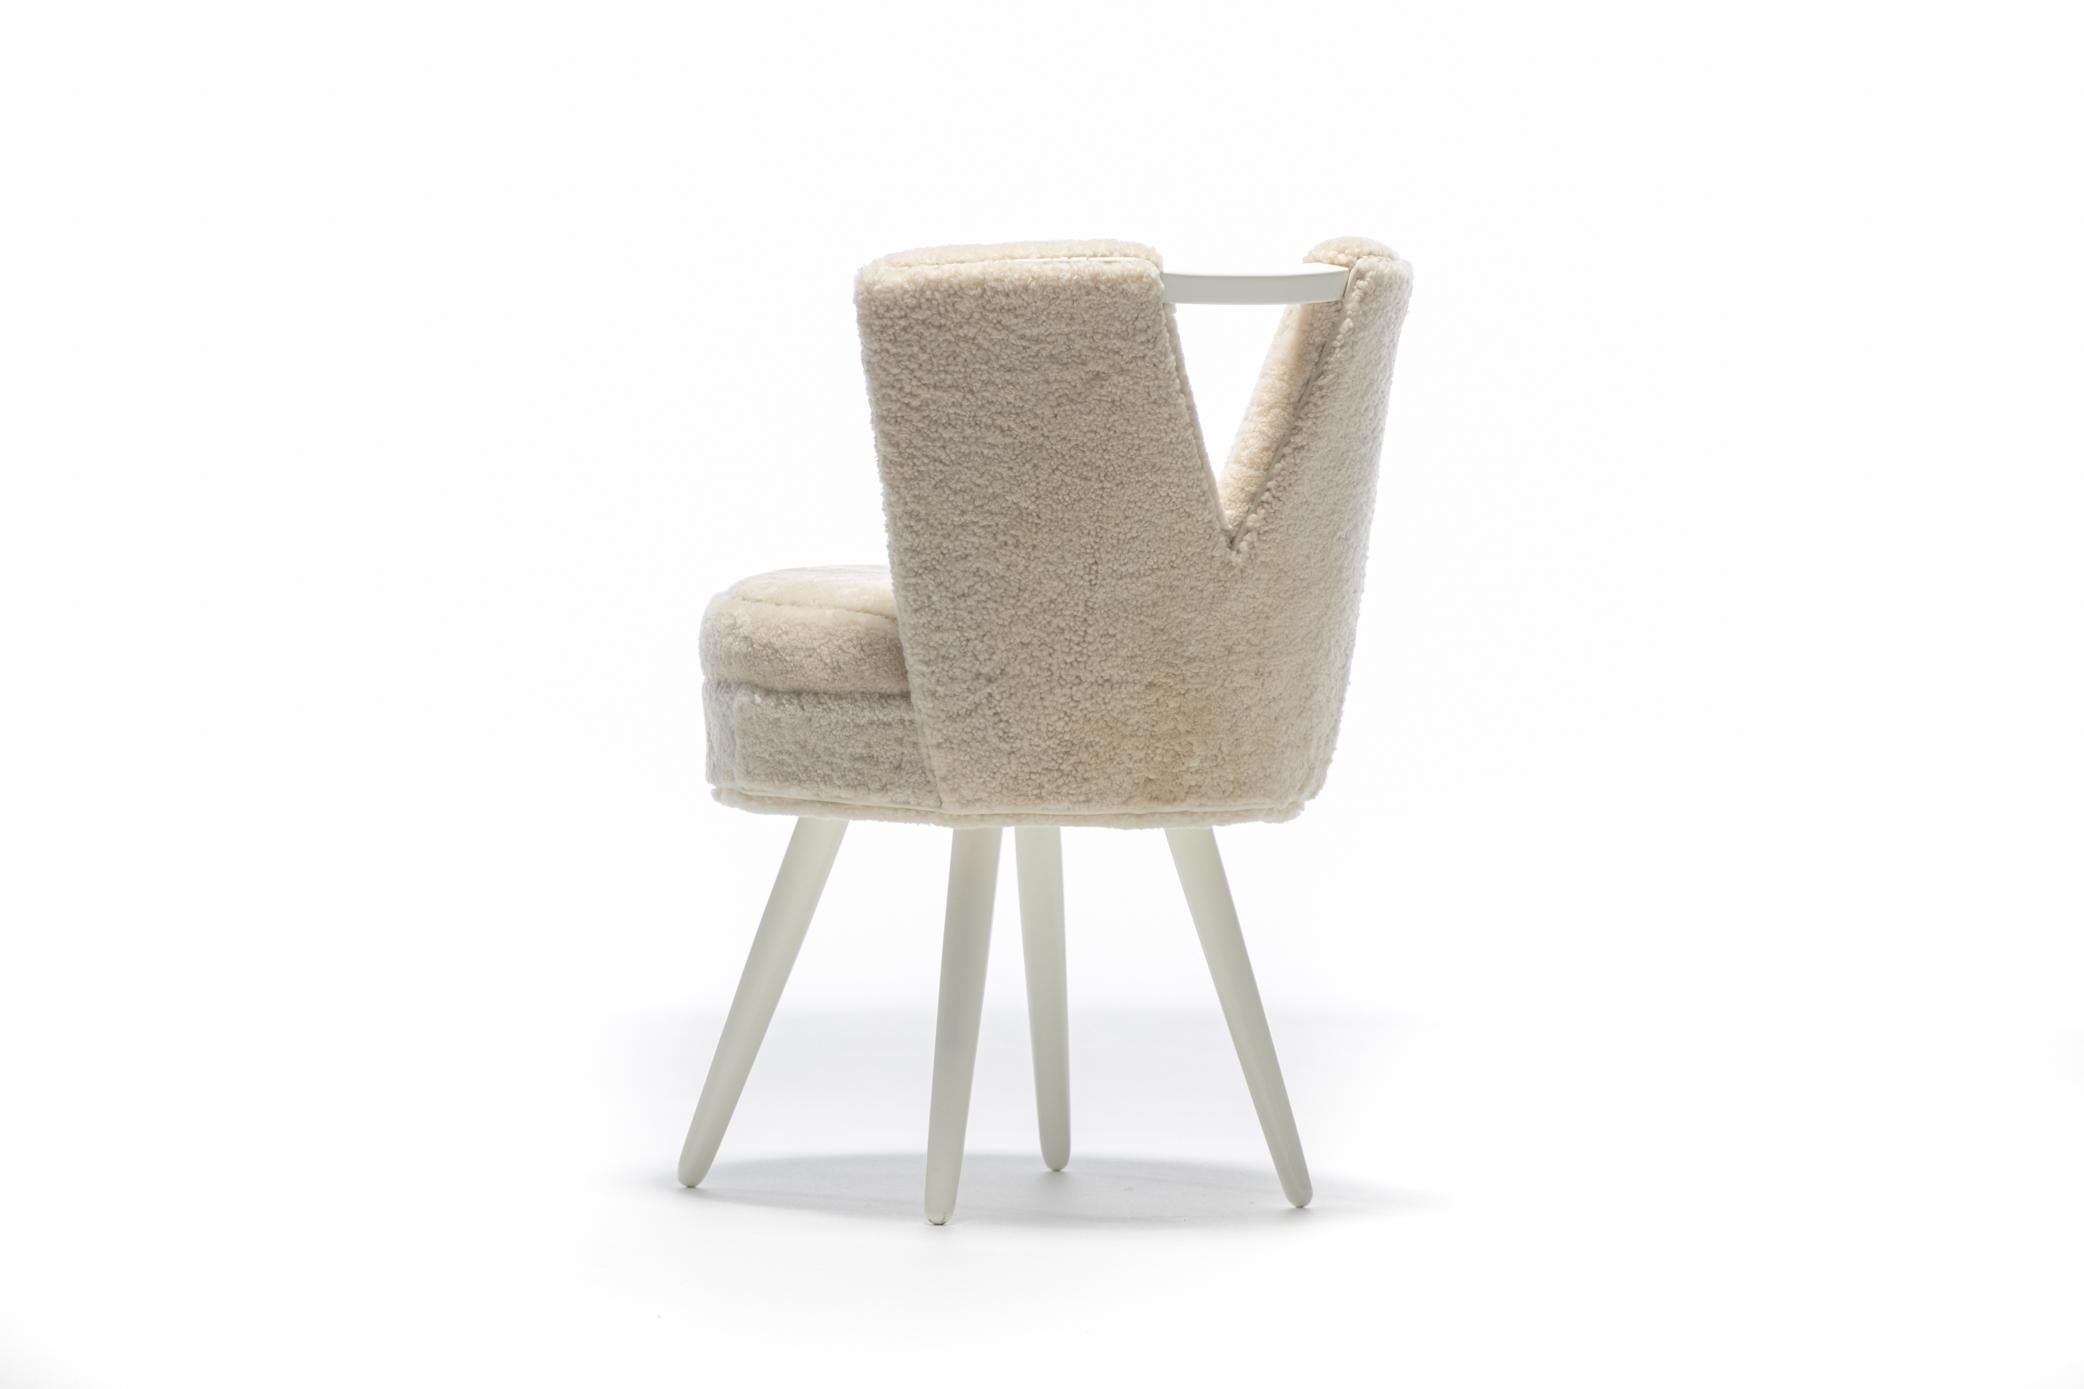 Contemporary Custom Vanity Stool in Ivory Cream Shearling with Leather Trim